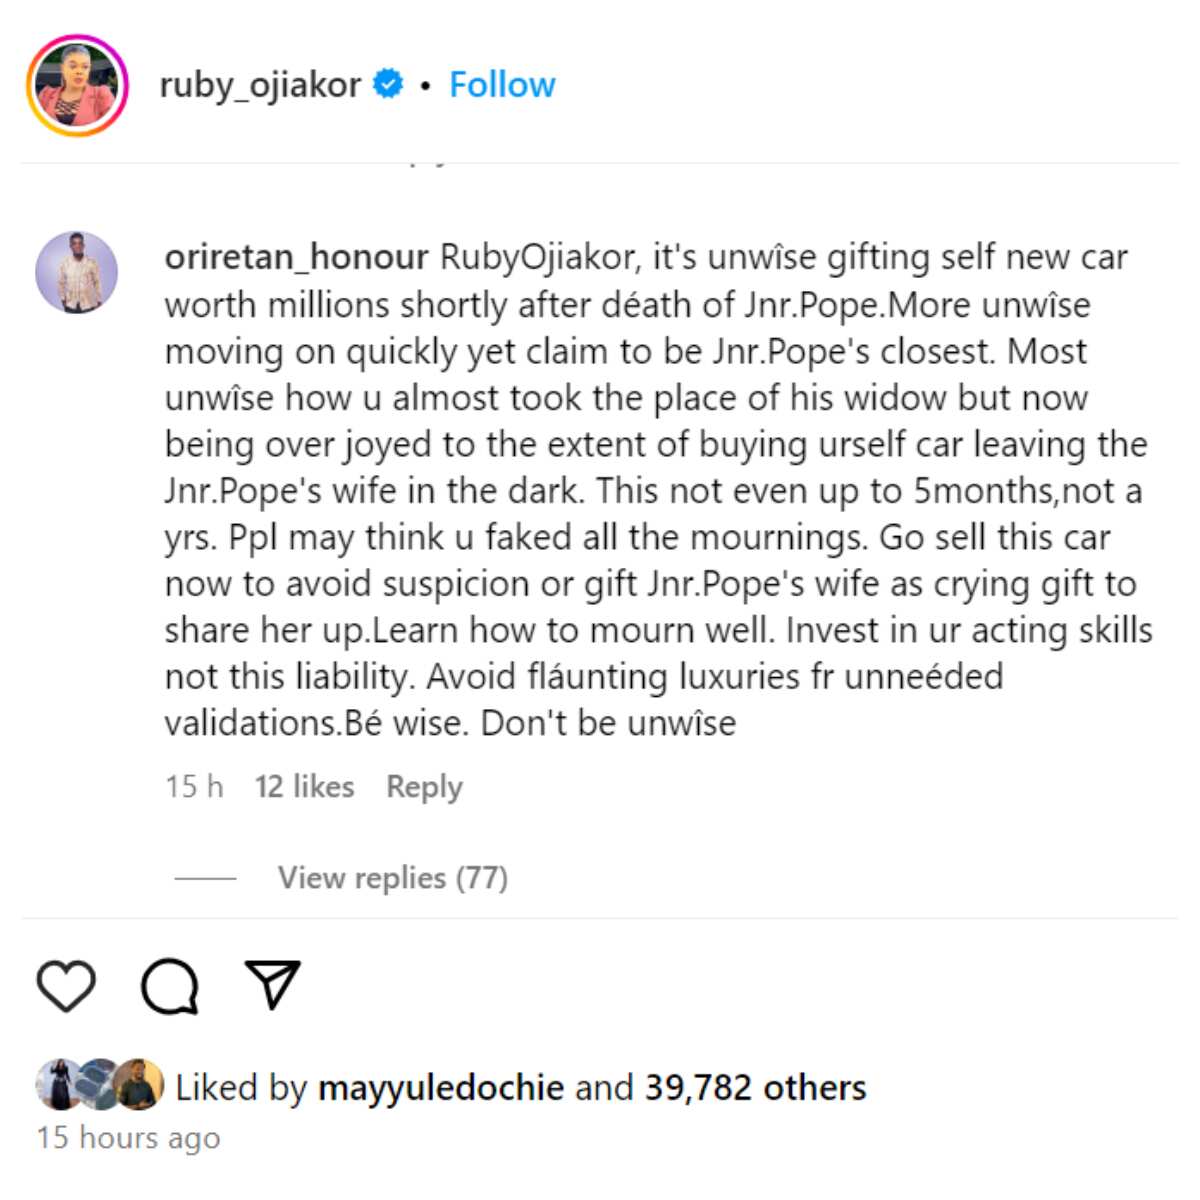 You will be shocked at what a man said about Ruby Ojiakor's new car and Junior Pope's wife